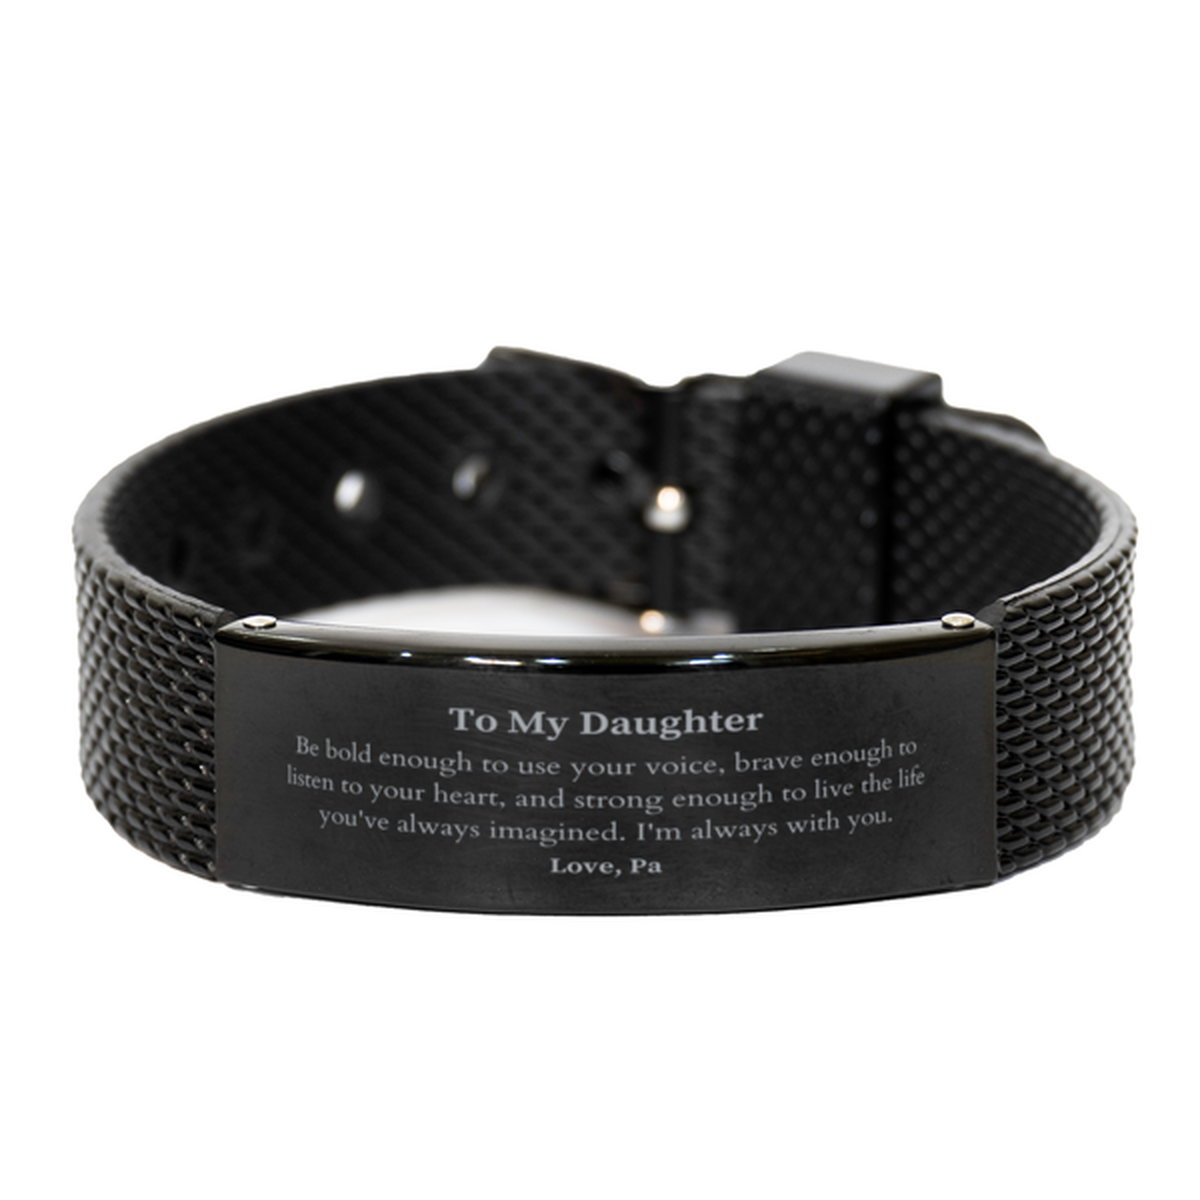 Keepsake Daughter Black Shark Mesh Bracelet Gift Idea Graduation Christmas Birthday Daughter from Pa, Daughter Be bold enough to use your voice, brave enough to listen to your heart. Love, Pa